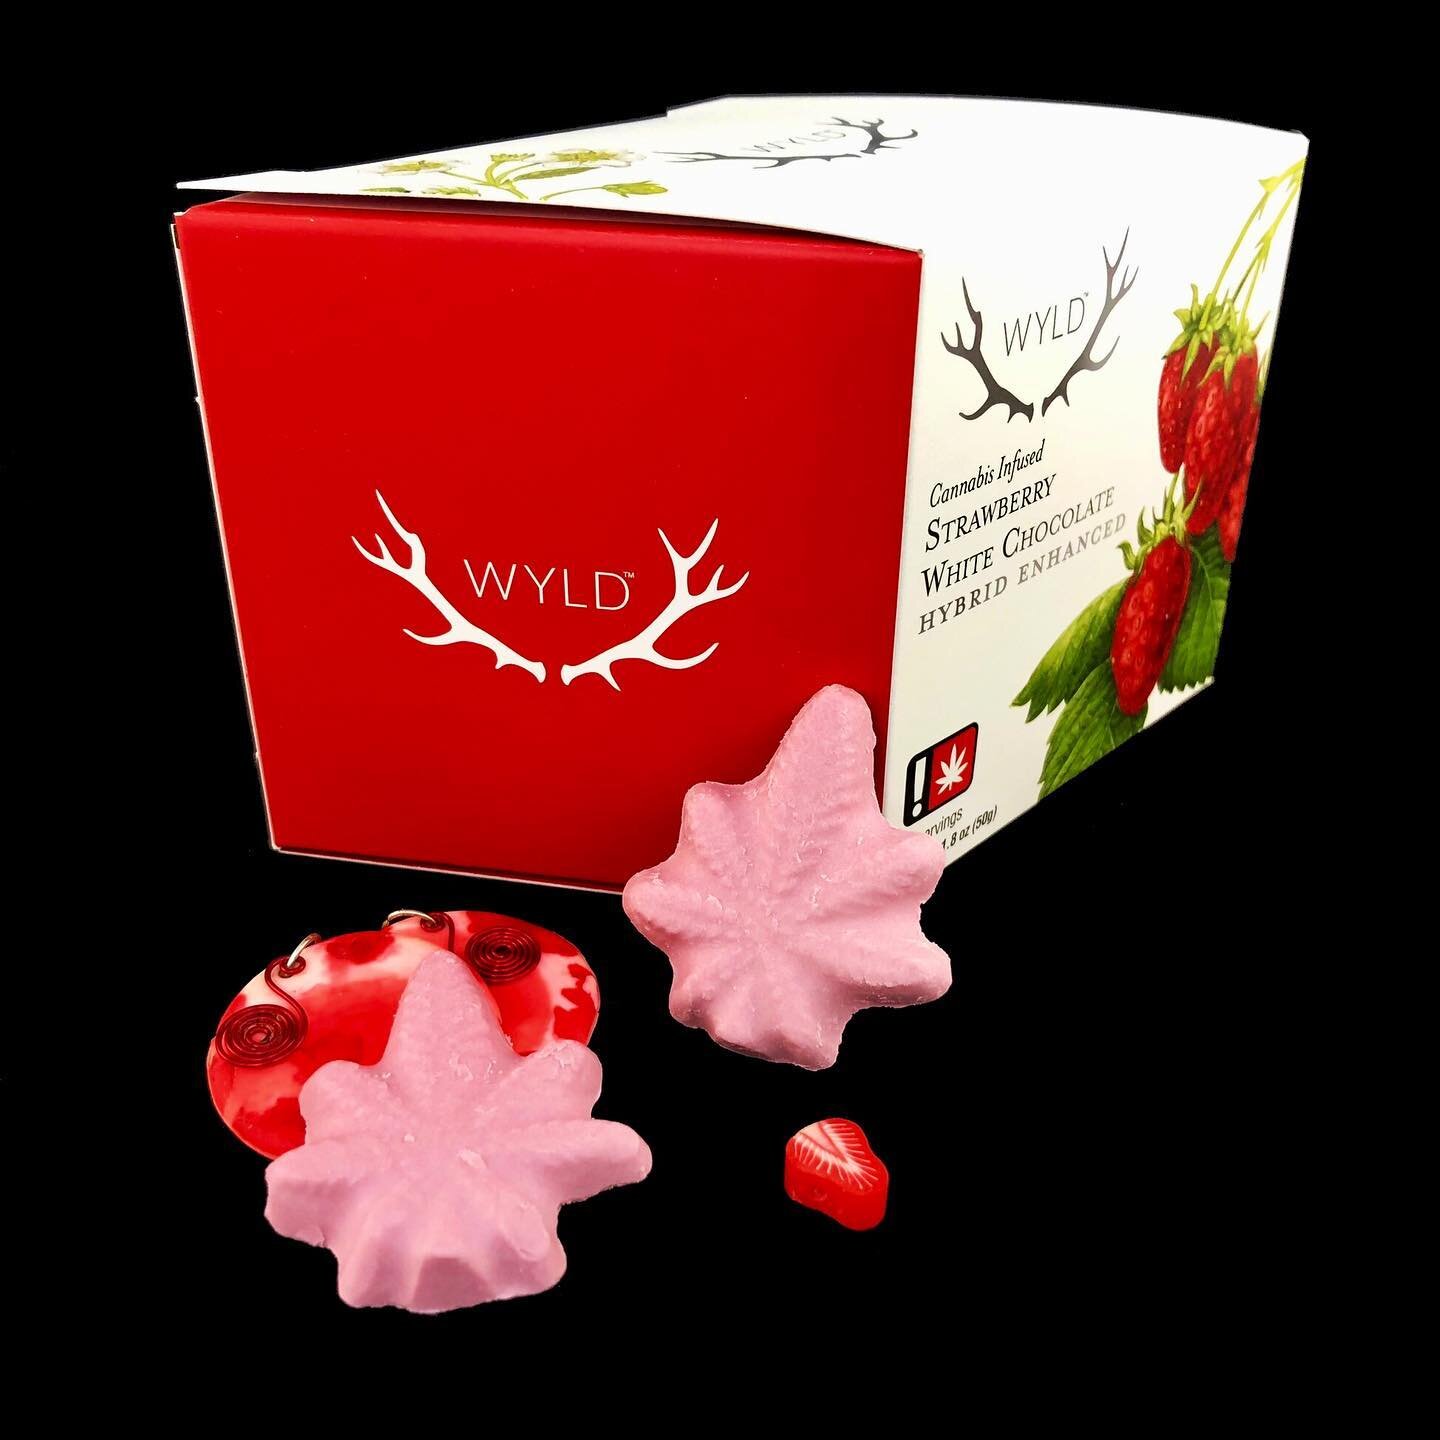 Infused Strawberry White Chocolates from @wyld_canna ! Enhanced with hybrid cannabis these chocolates smell like a strawberry cream dream. Keep the 10 servings to yourself, or share with a friend.

For use only by adults 21 and older. Keep out of rea